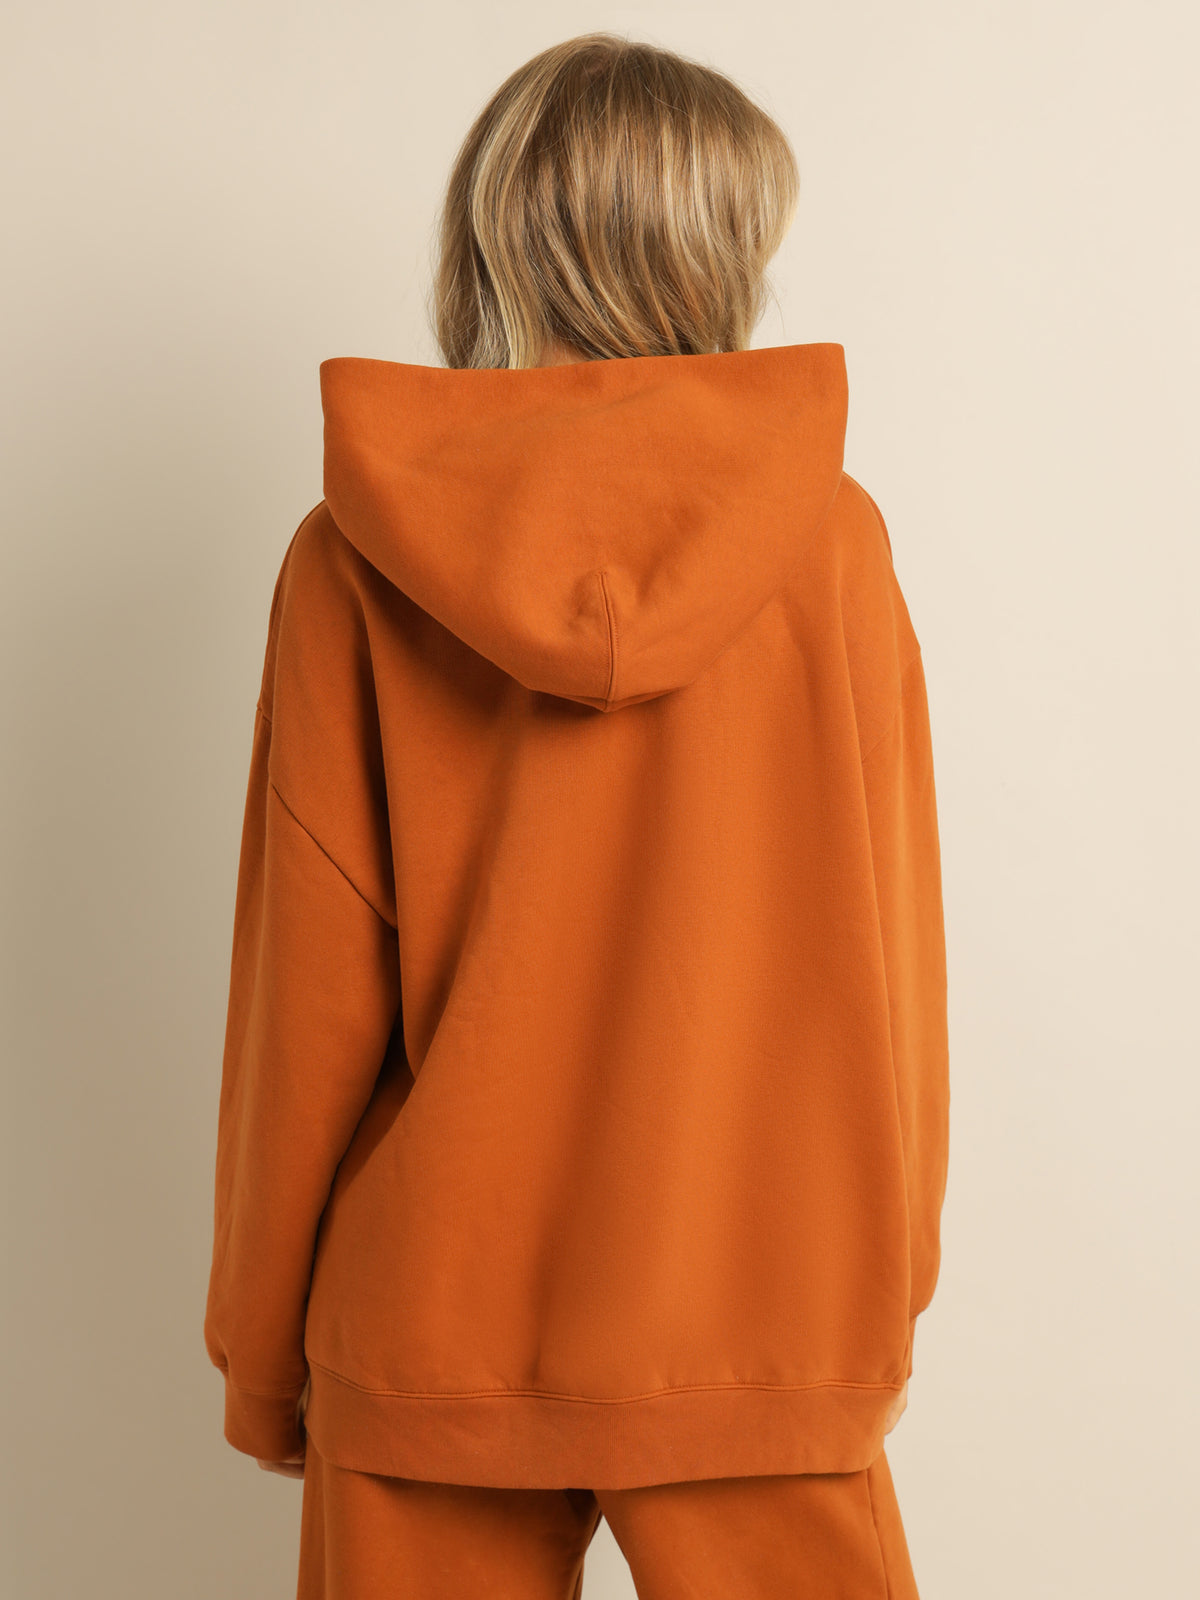 Apartment Hoodie in Glazed Ginger